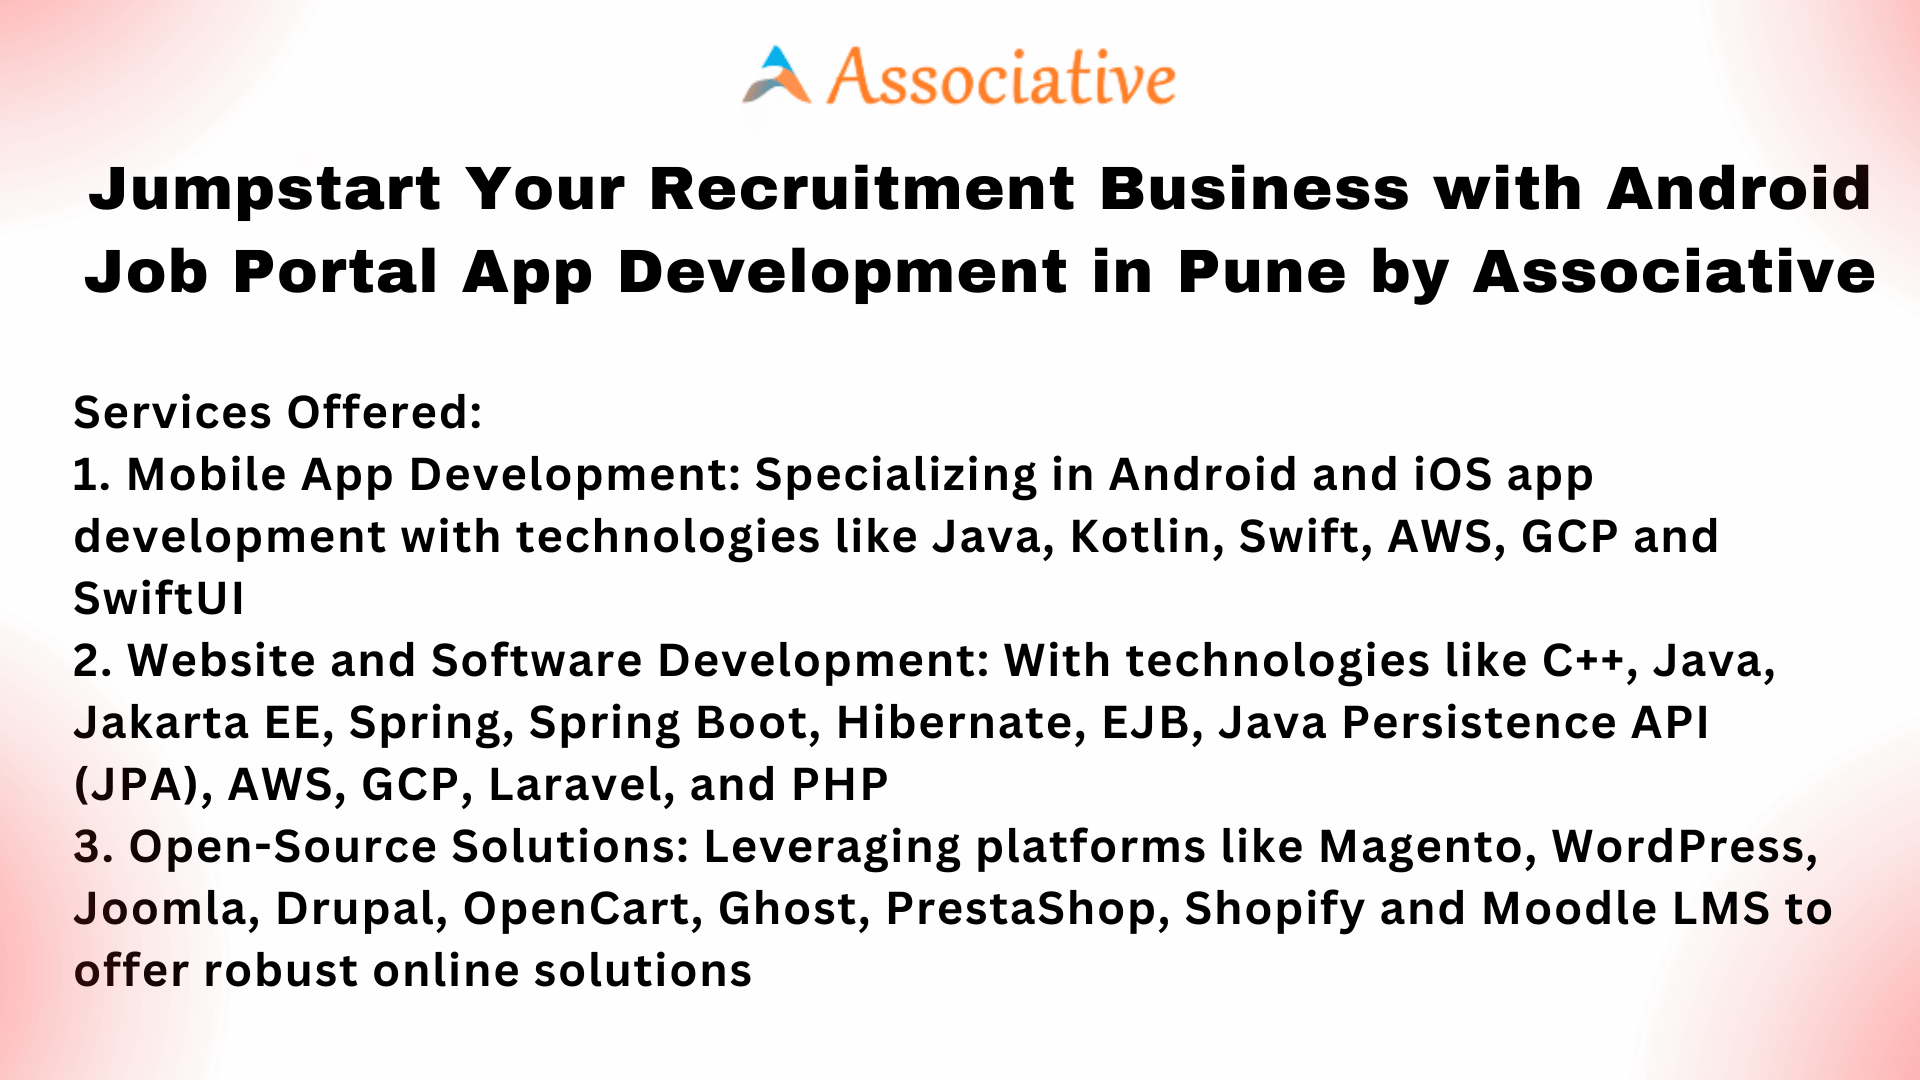 Jumpstart Your Recruitment Business with Android Job Portal App Development in Pune by Associative